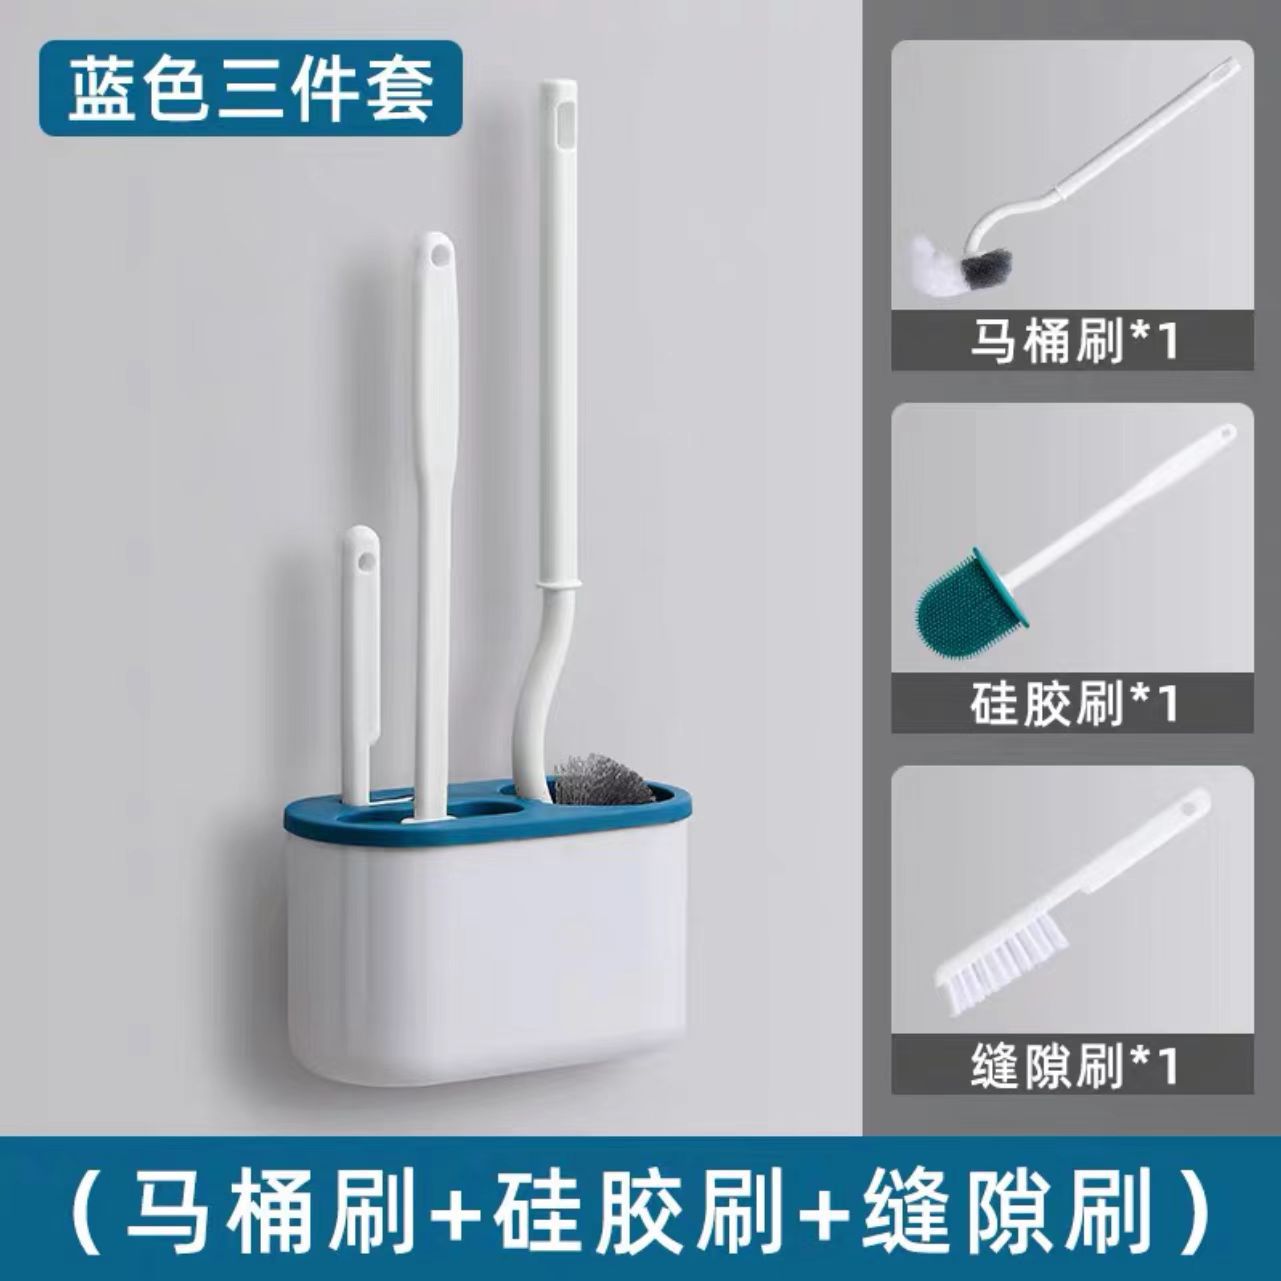 Wall-Mounted Japanese Toilet Brush Toilet Set Dead-Zone Free Toilet Brush Long Handle Soft Bristles Cleaning Brush Household Daily Necessities